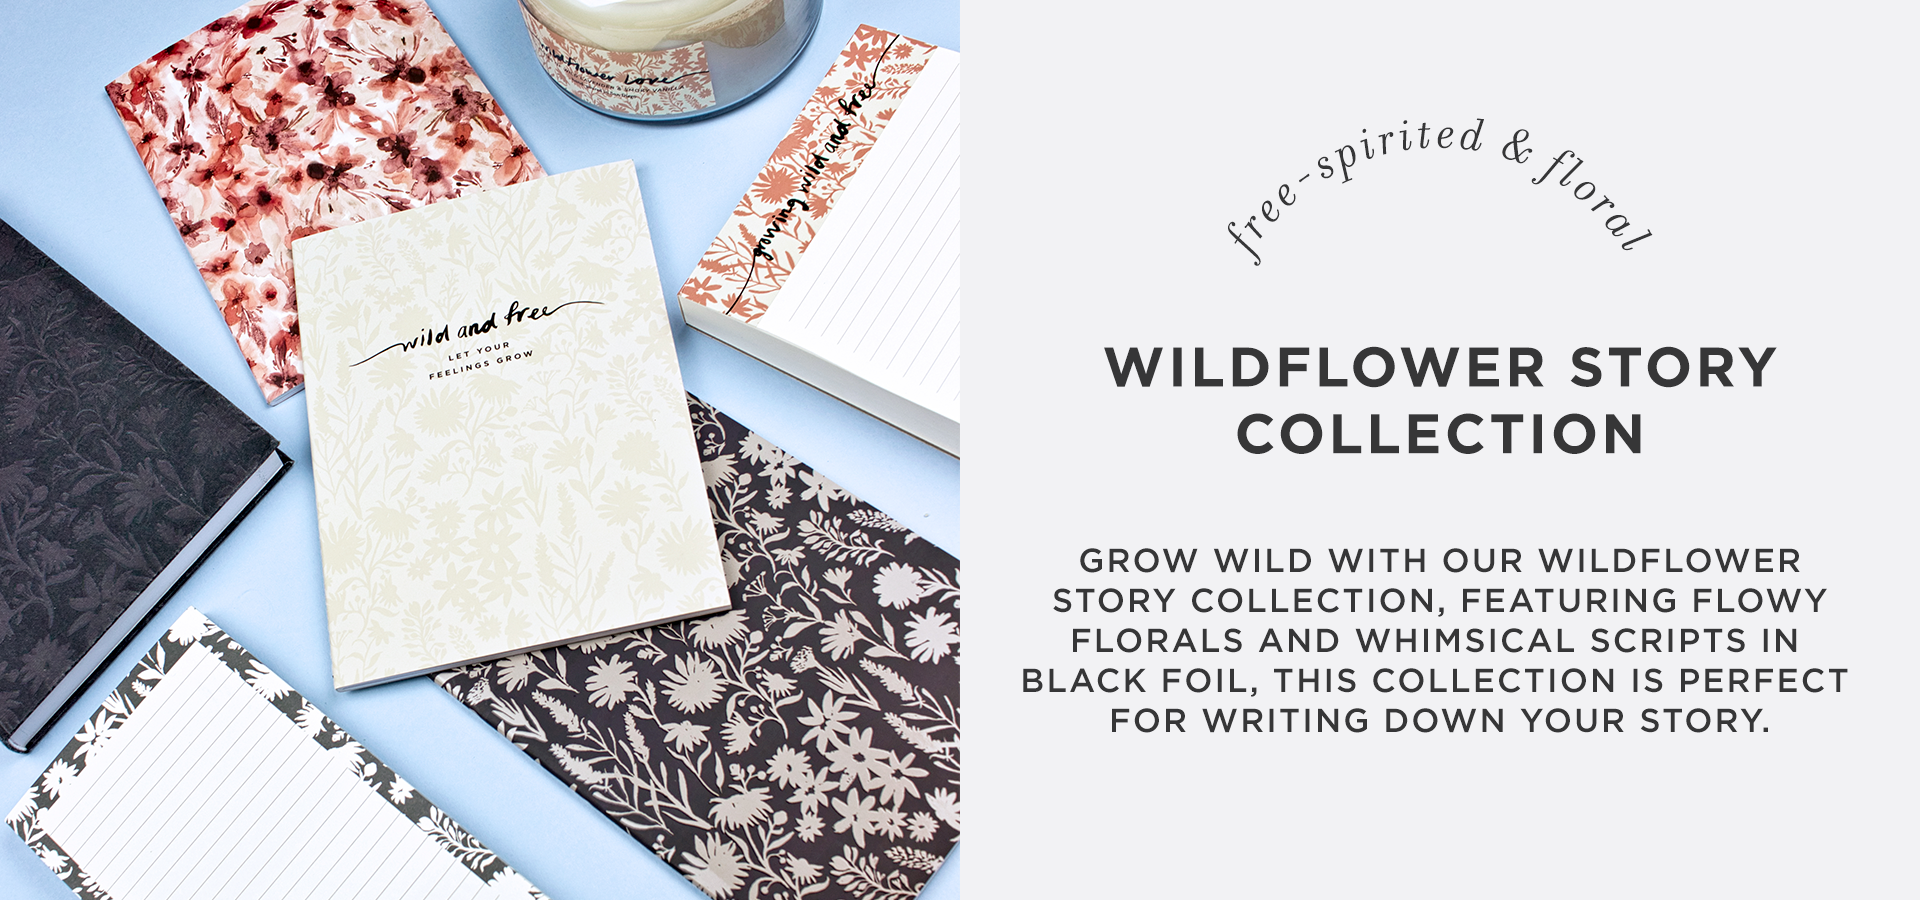 wildflower story banner featuring stationery from wildflower story collection